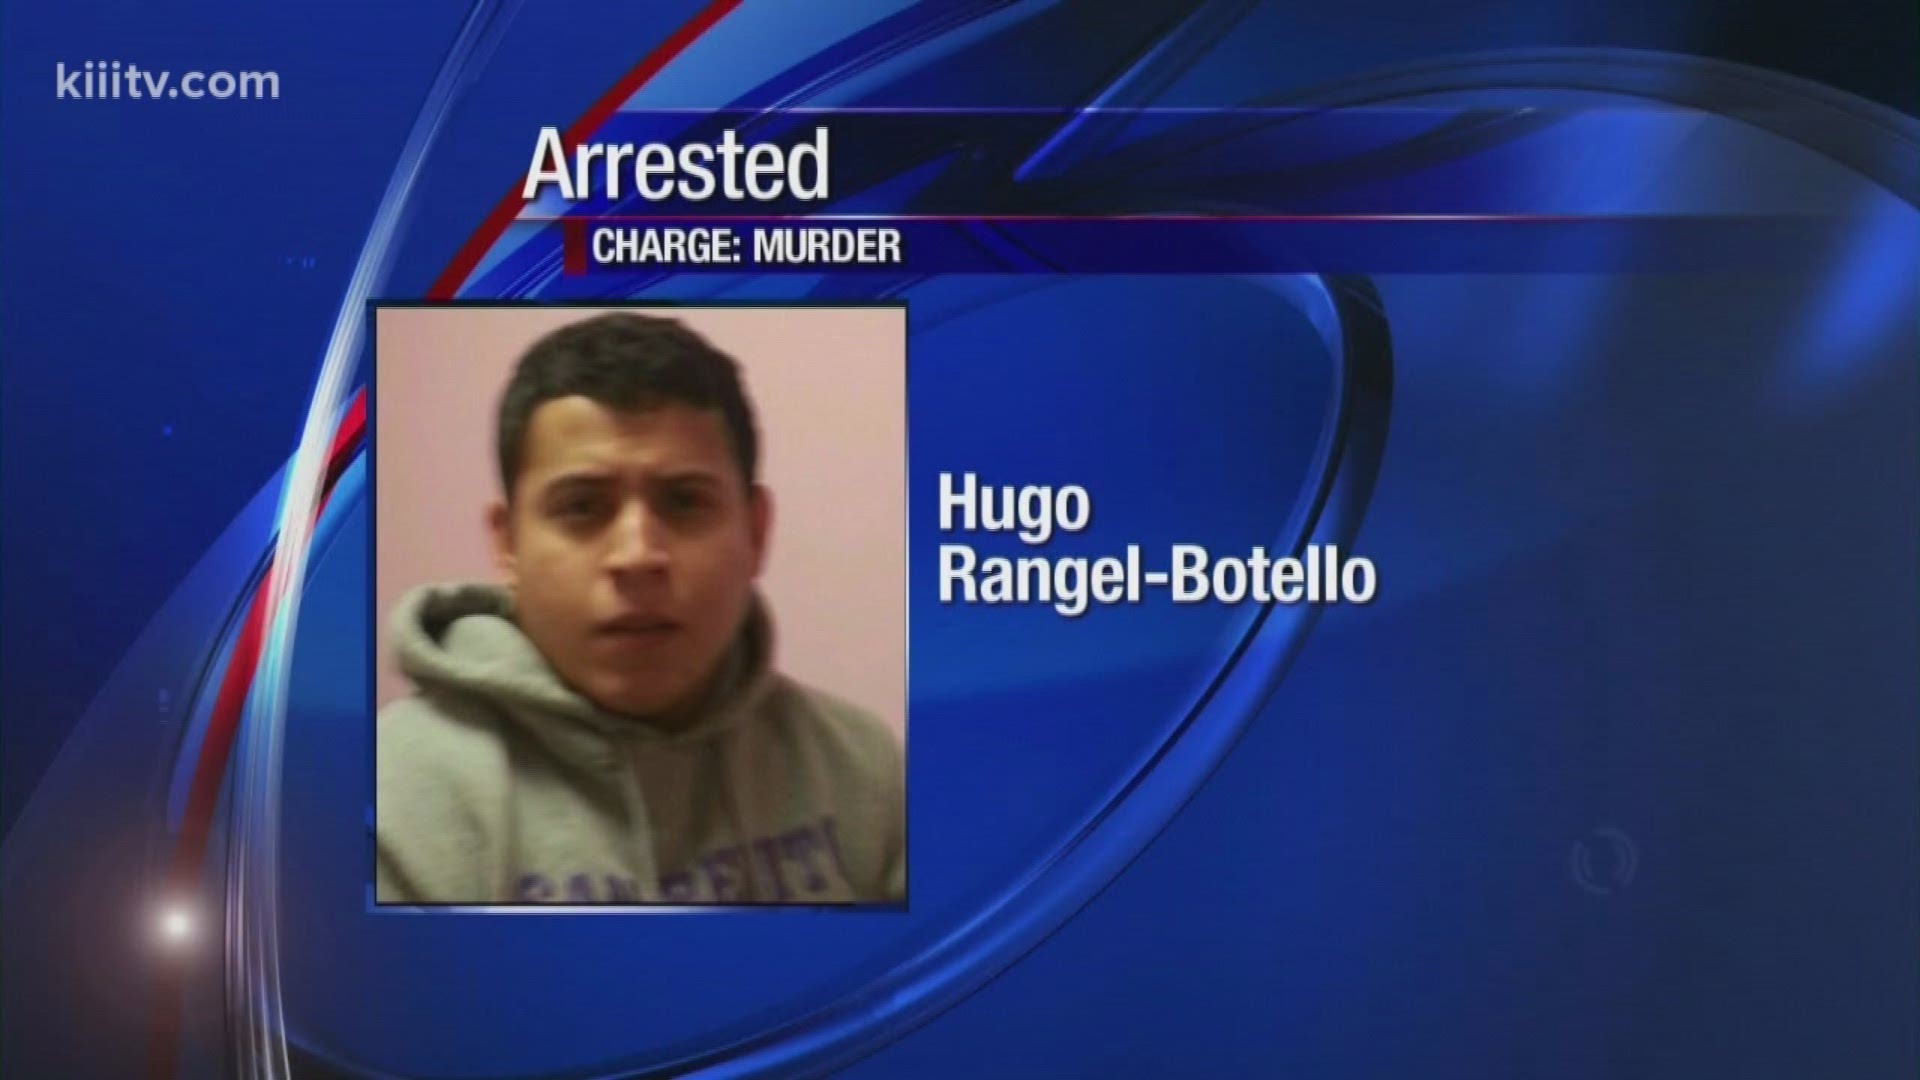 Hugo Rangel-Botello pleaded guilty to murder and was sentenced to 25 years in prison for the murder of Gilbert Burrell.